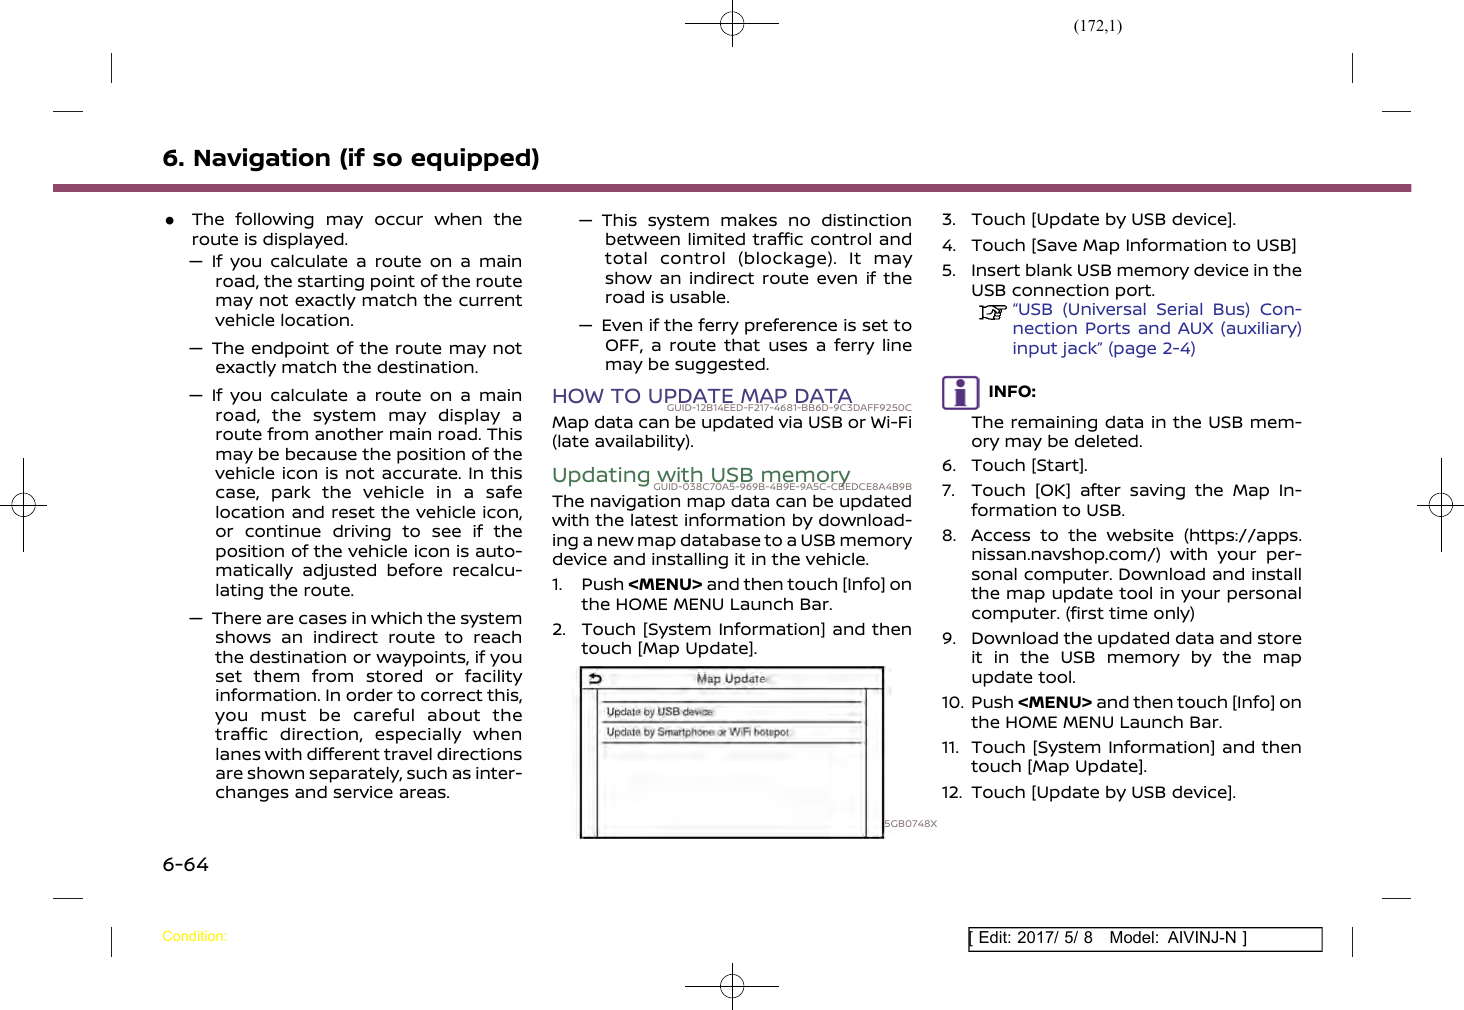 Page 172 of Robert Bosch Car Multimedia AIVICMFB0 Navigation System with Bluetooth and WLAN User Manual